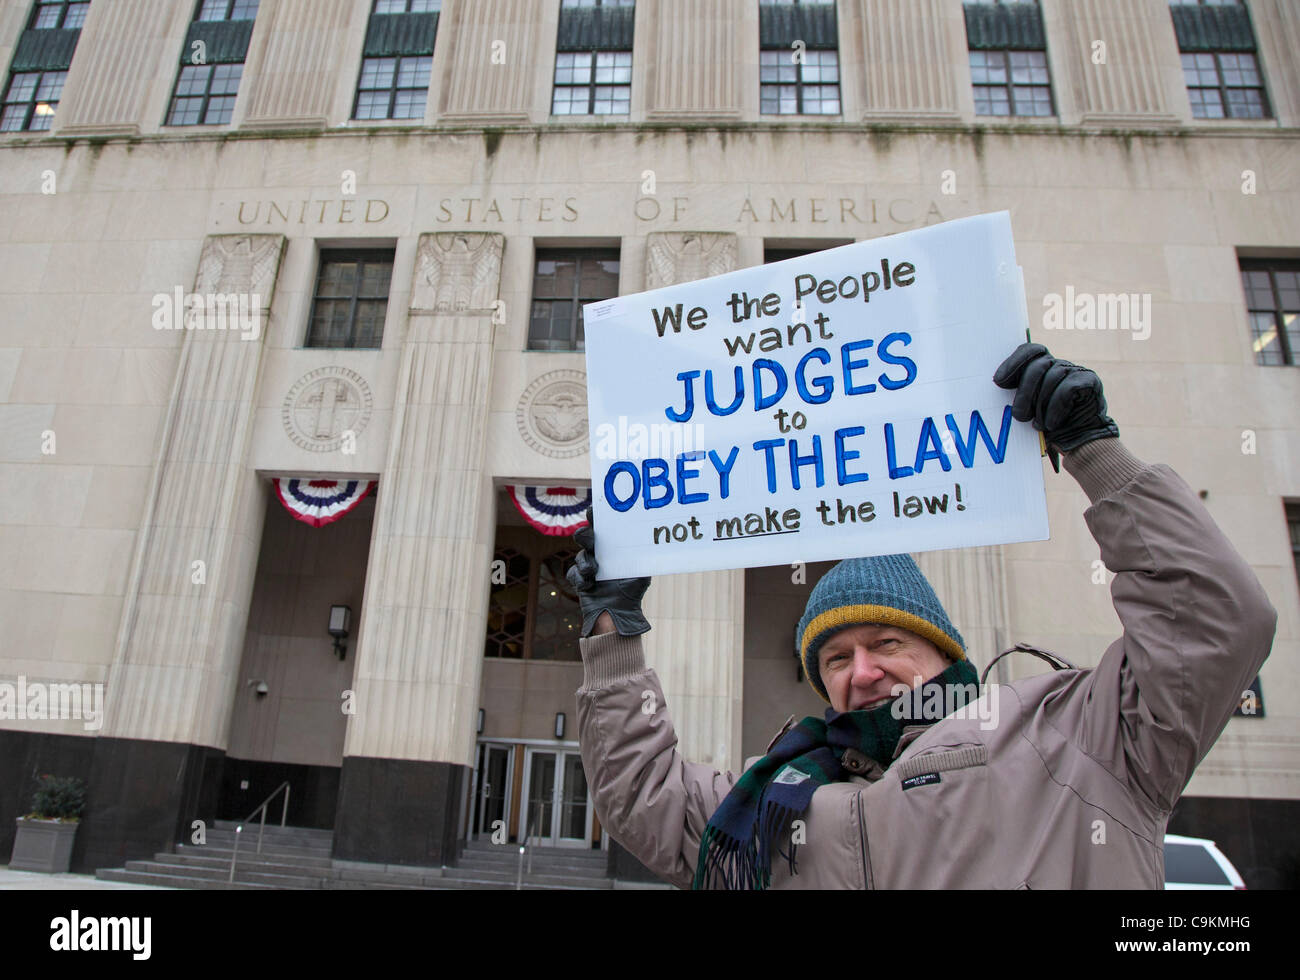 Detroit, Michigan - Activists mark the second anniversary of the Supreme Court's 'Citizens United' decision by picketing the federal courthouse. 'Citizens United' opened the way for corporations to make unlimited contributions to support or oppose political candidates. Stock Photo